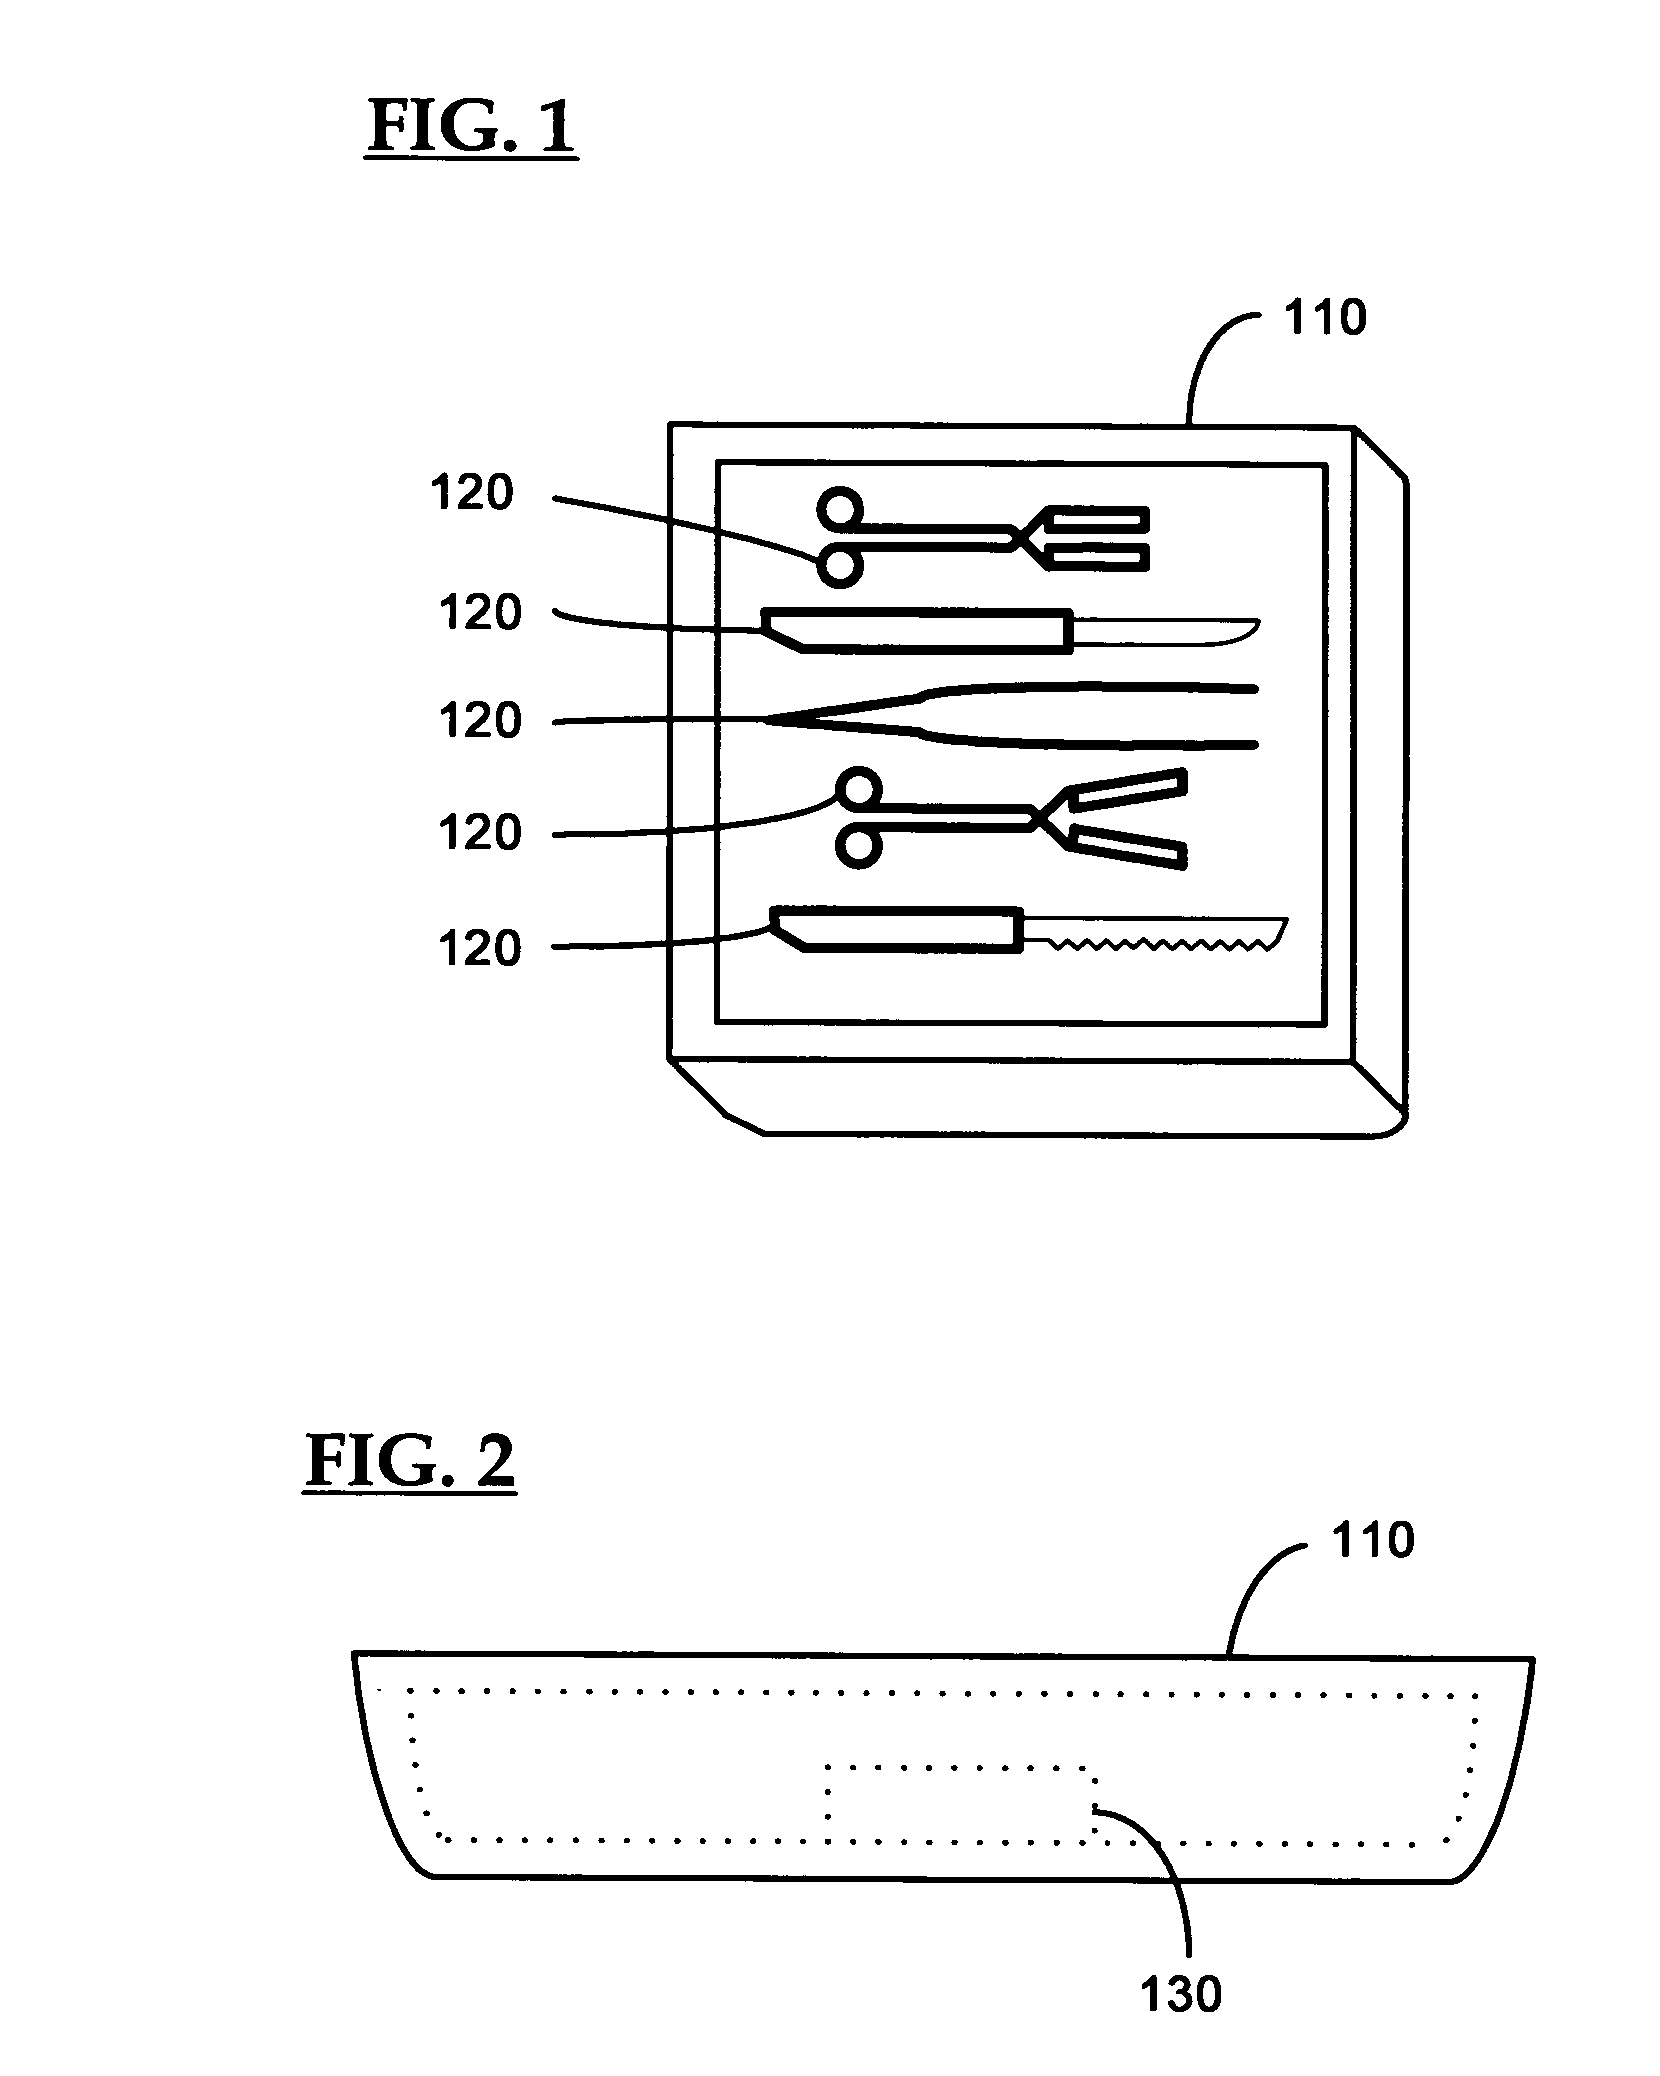 Surgical instrument tray shipping tote identification system and methods of using same